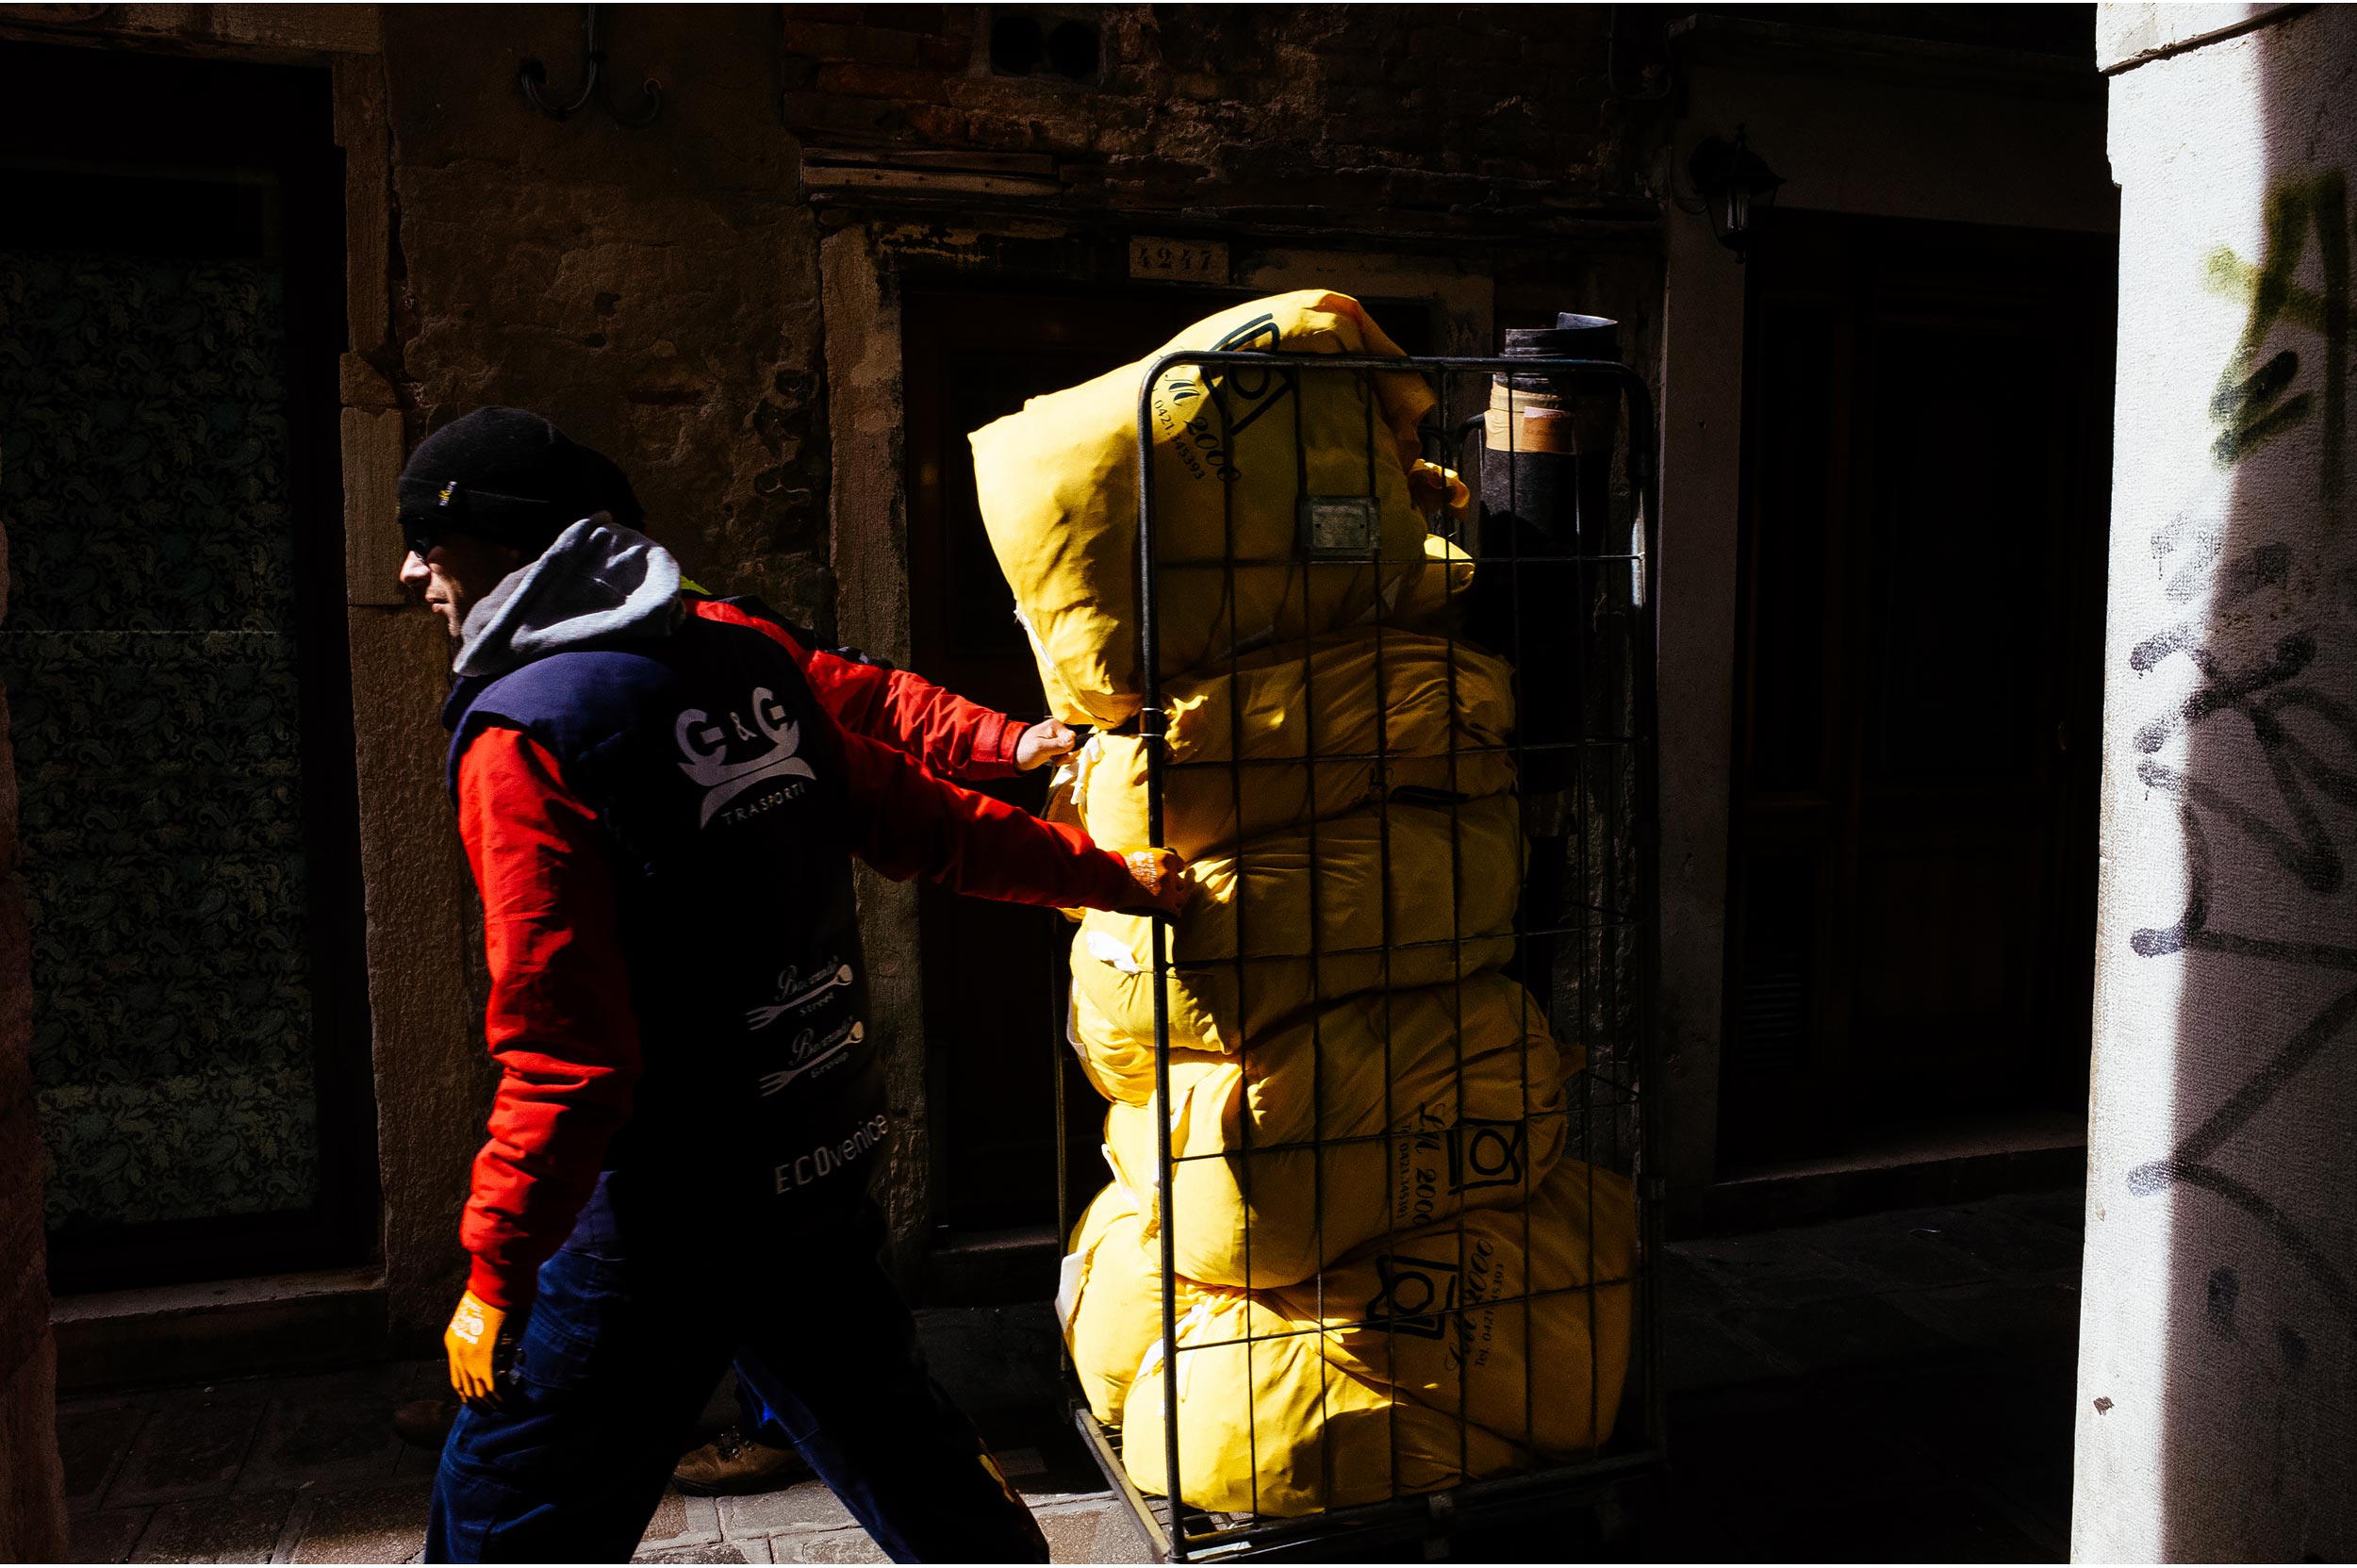 Venice, Italy, 2016. Two workers carrying some stuff look like one having three arms.